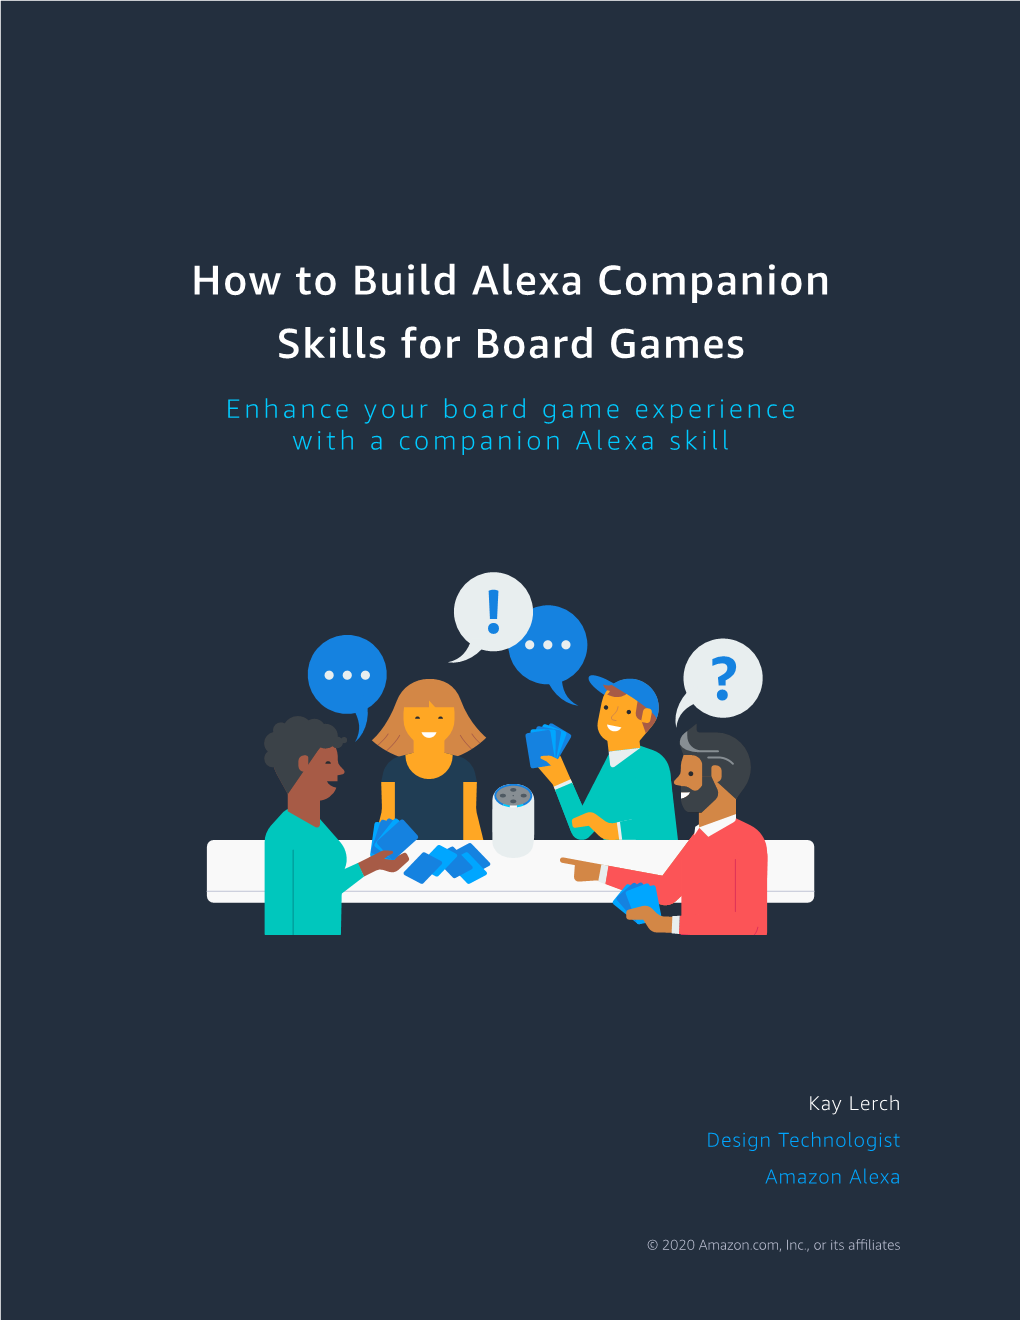 How to Build Alexa Companion Skills for Board Games